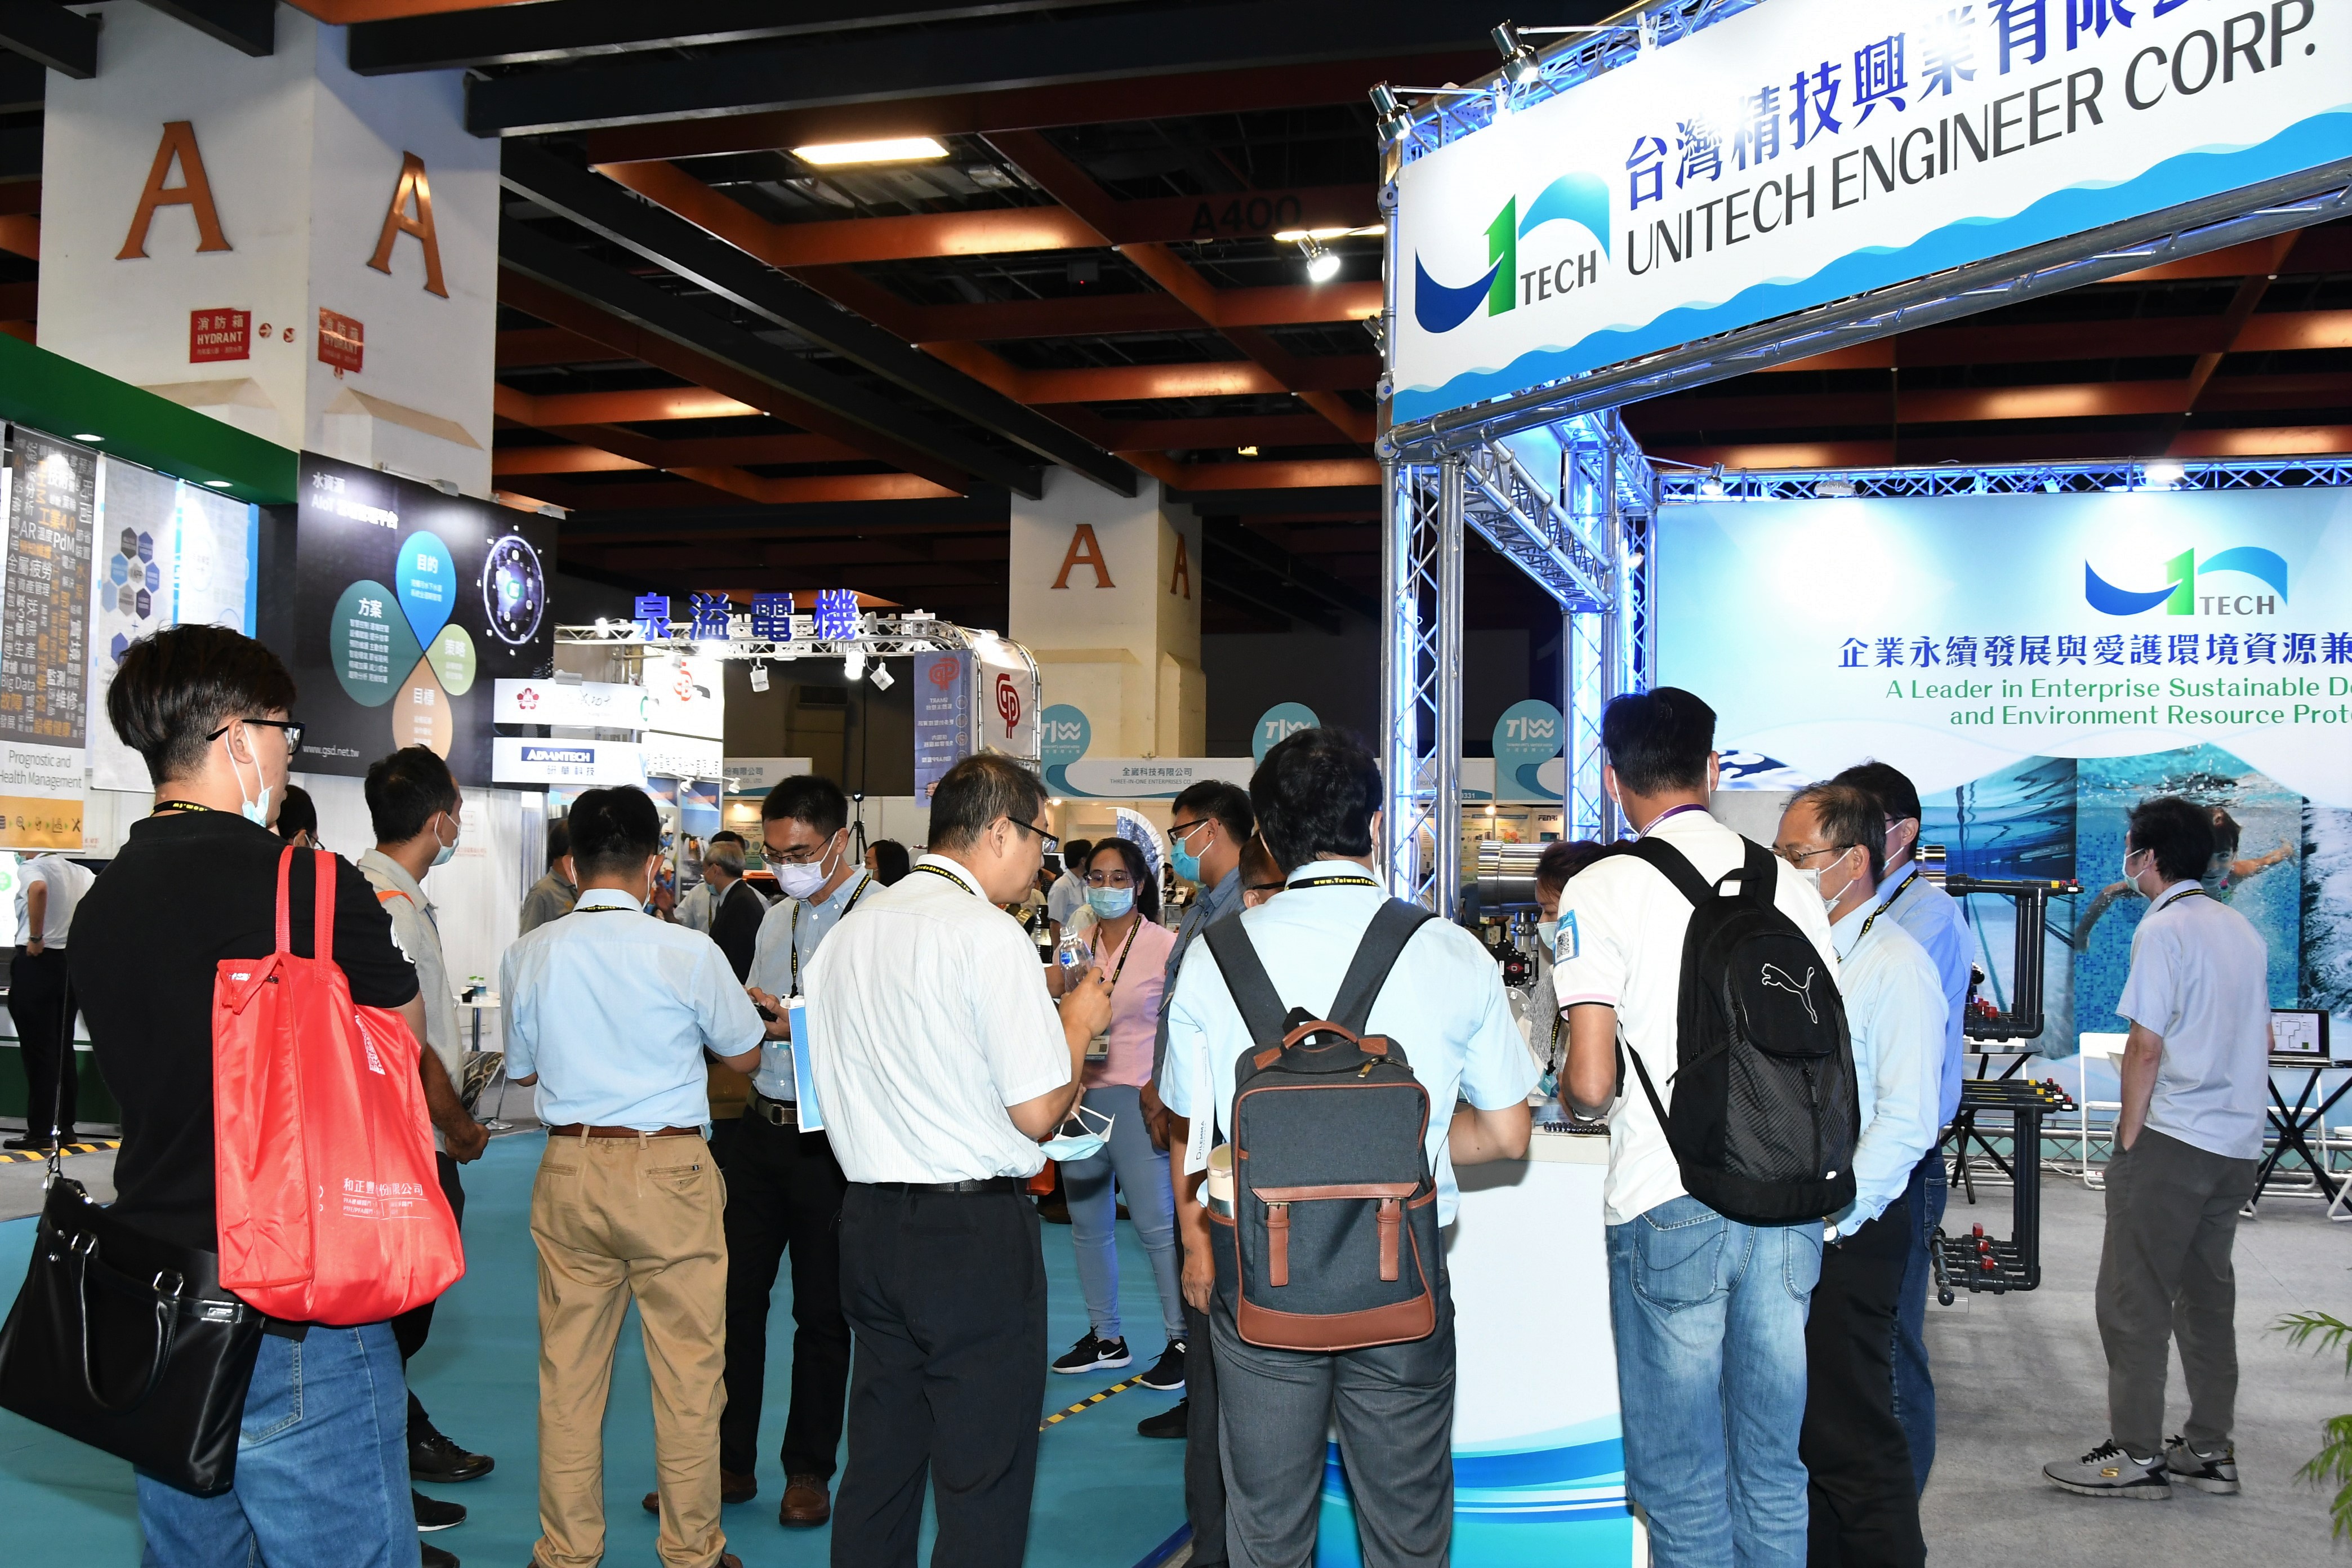 Exhibits at TIWW & CE Taiwan included products capitalising on data analysis and remote monitoring technologies.